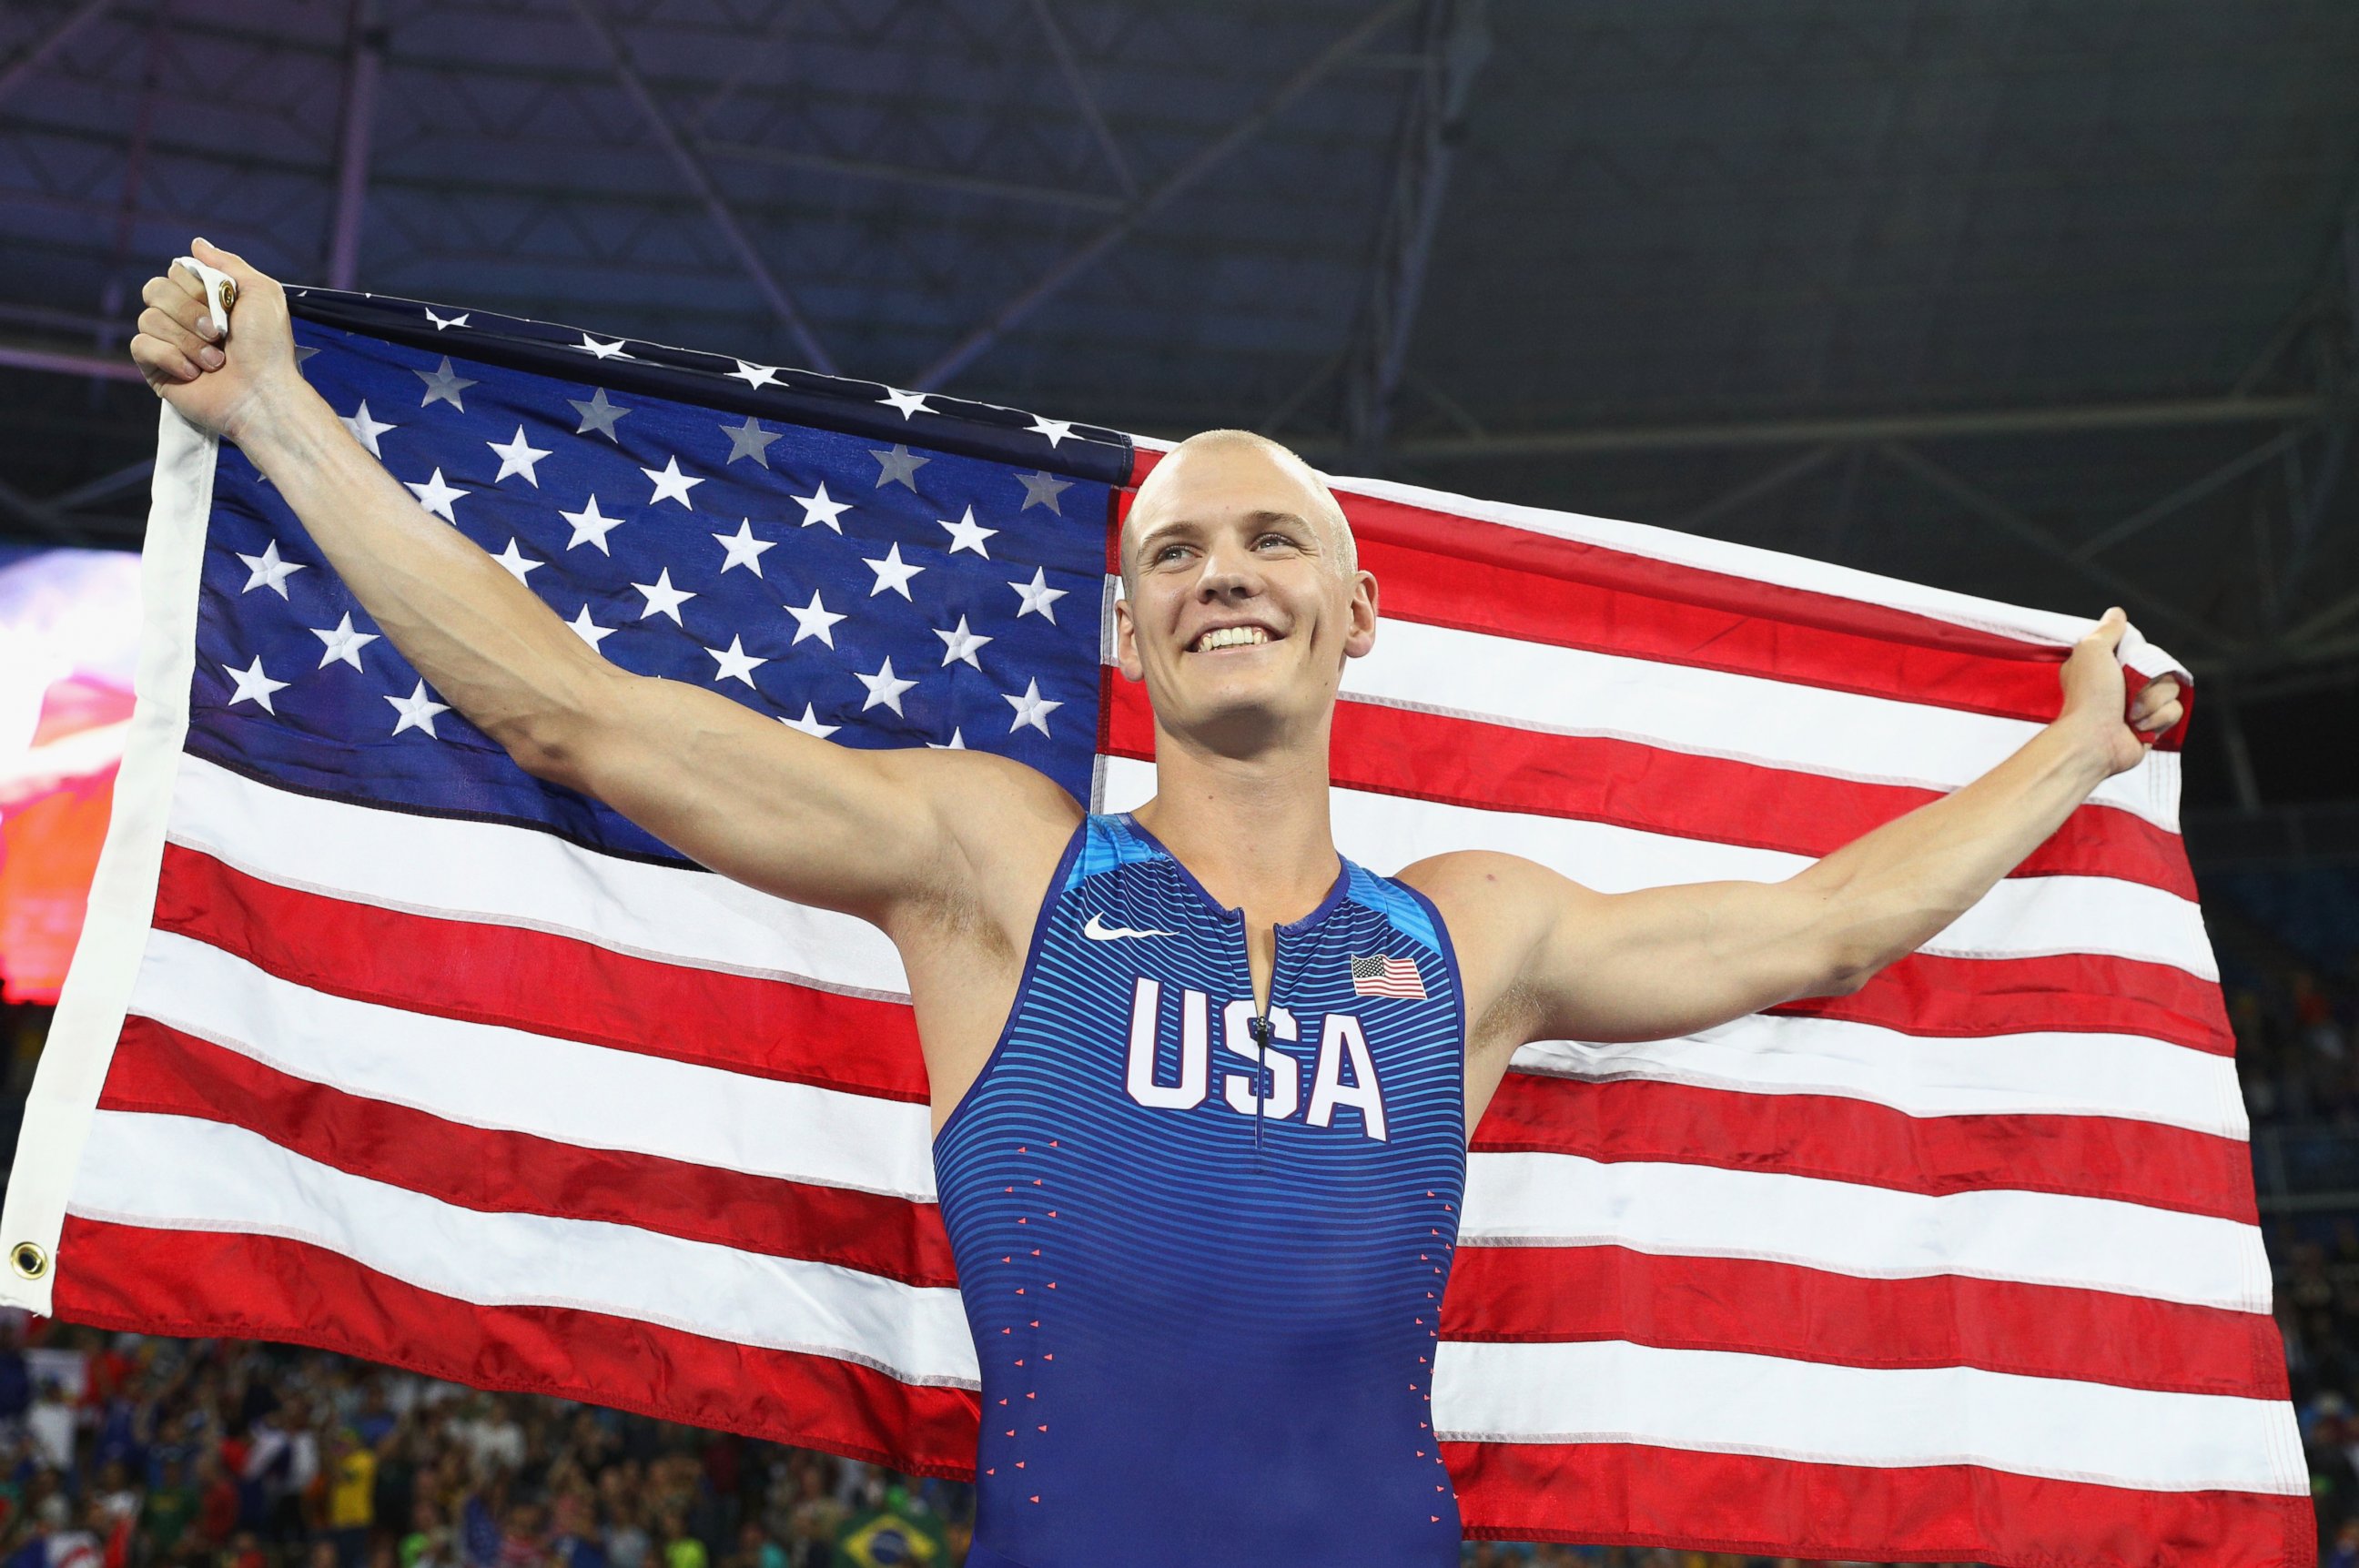 PHOTO: Sam Kendricks of the United States celebrates winning the bronze medal in the Men's Pole Vault Final on Day 10 of the Rio 2016 Olympic Games, Aug. 15, 2016, in Rio de Janeiro, Brazil. 